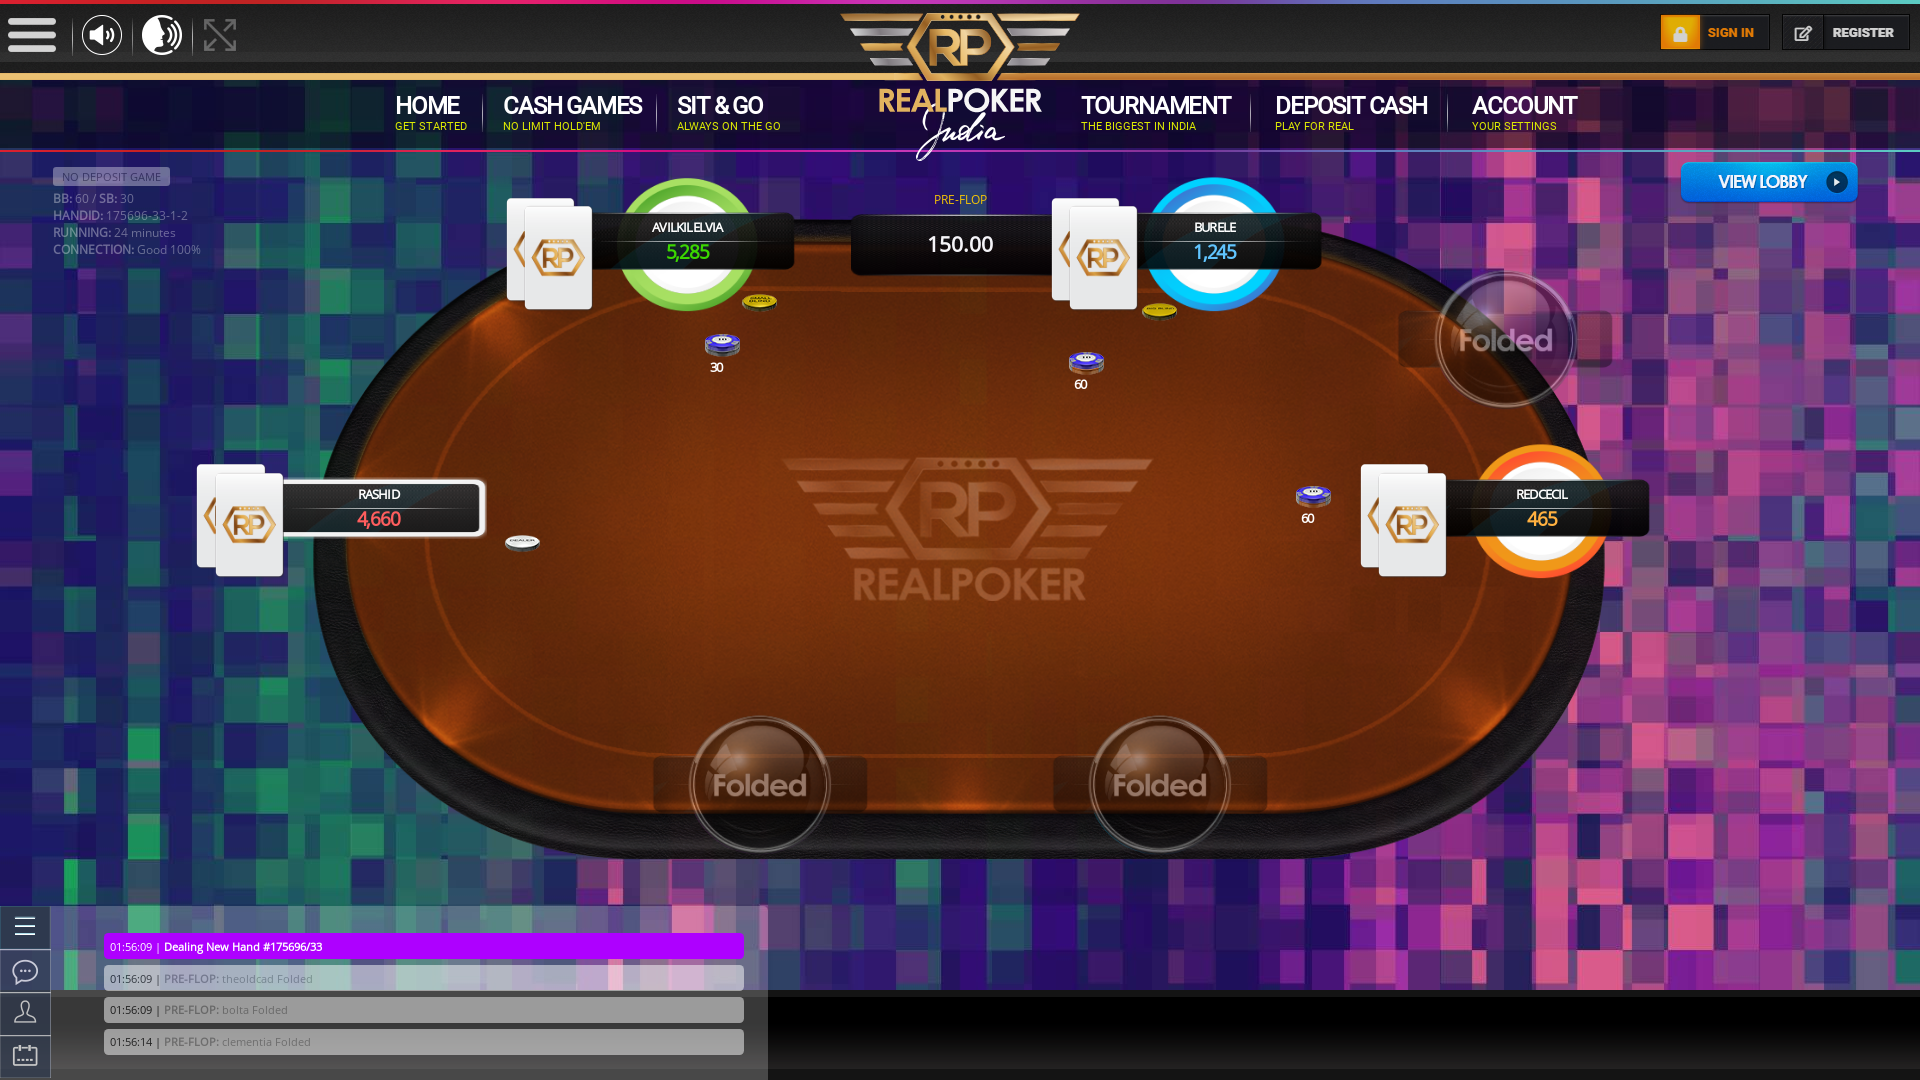 Real poker on a 10 player table in the 24th minute of the game